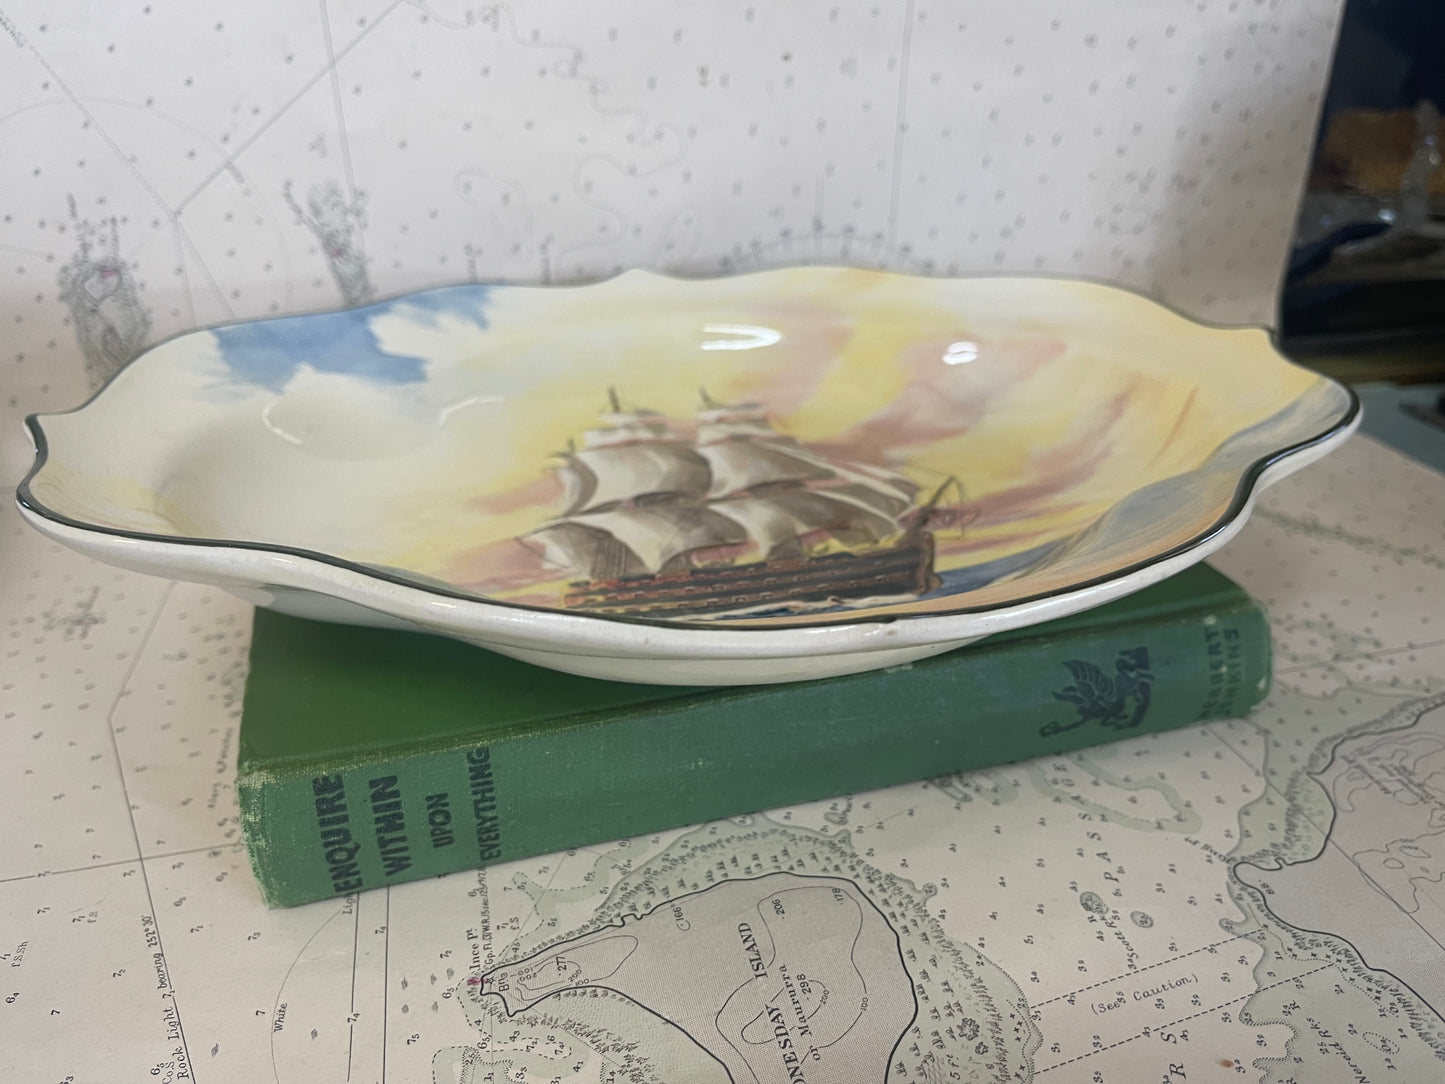 Royal Doulton famous ships dish H.M.S Victory flagship of Lord Nelson